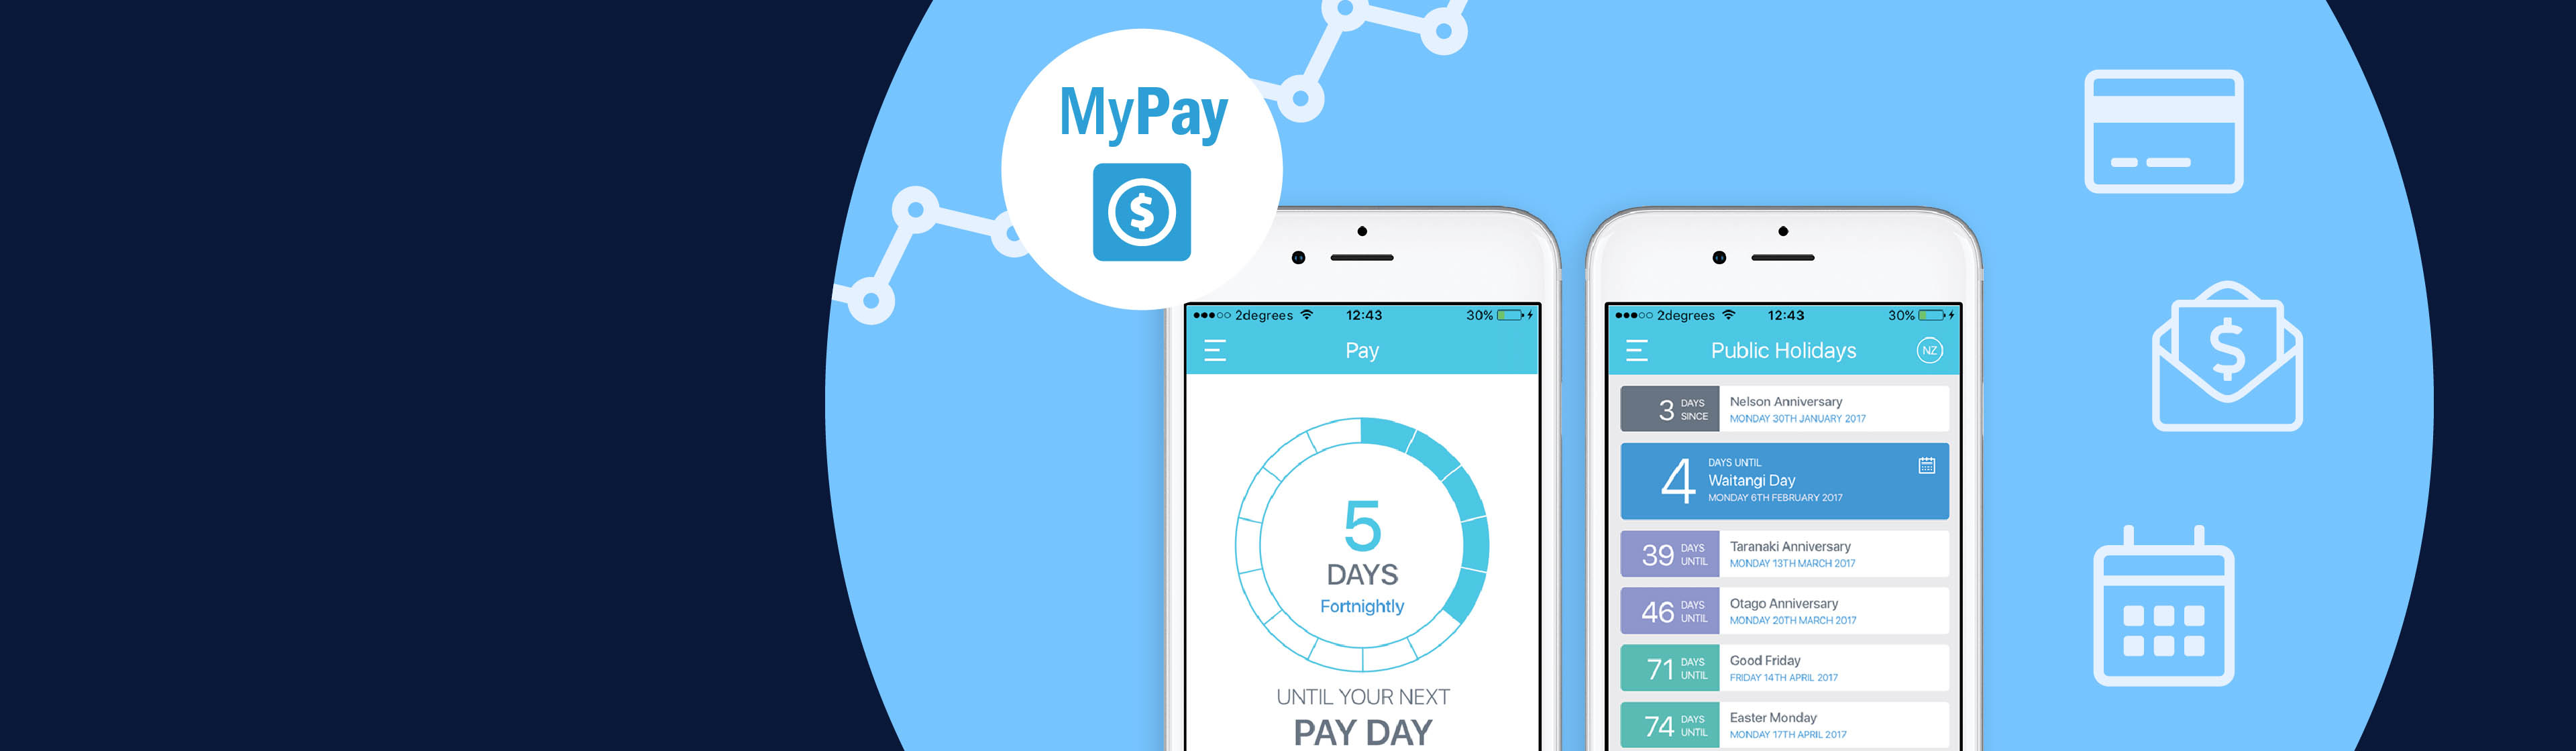 Mobile mockup images of the MyPay app surrounded by the logo and payroll icons